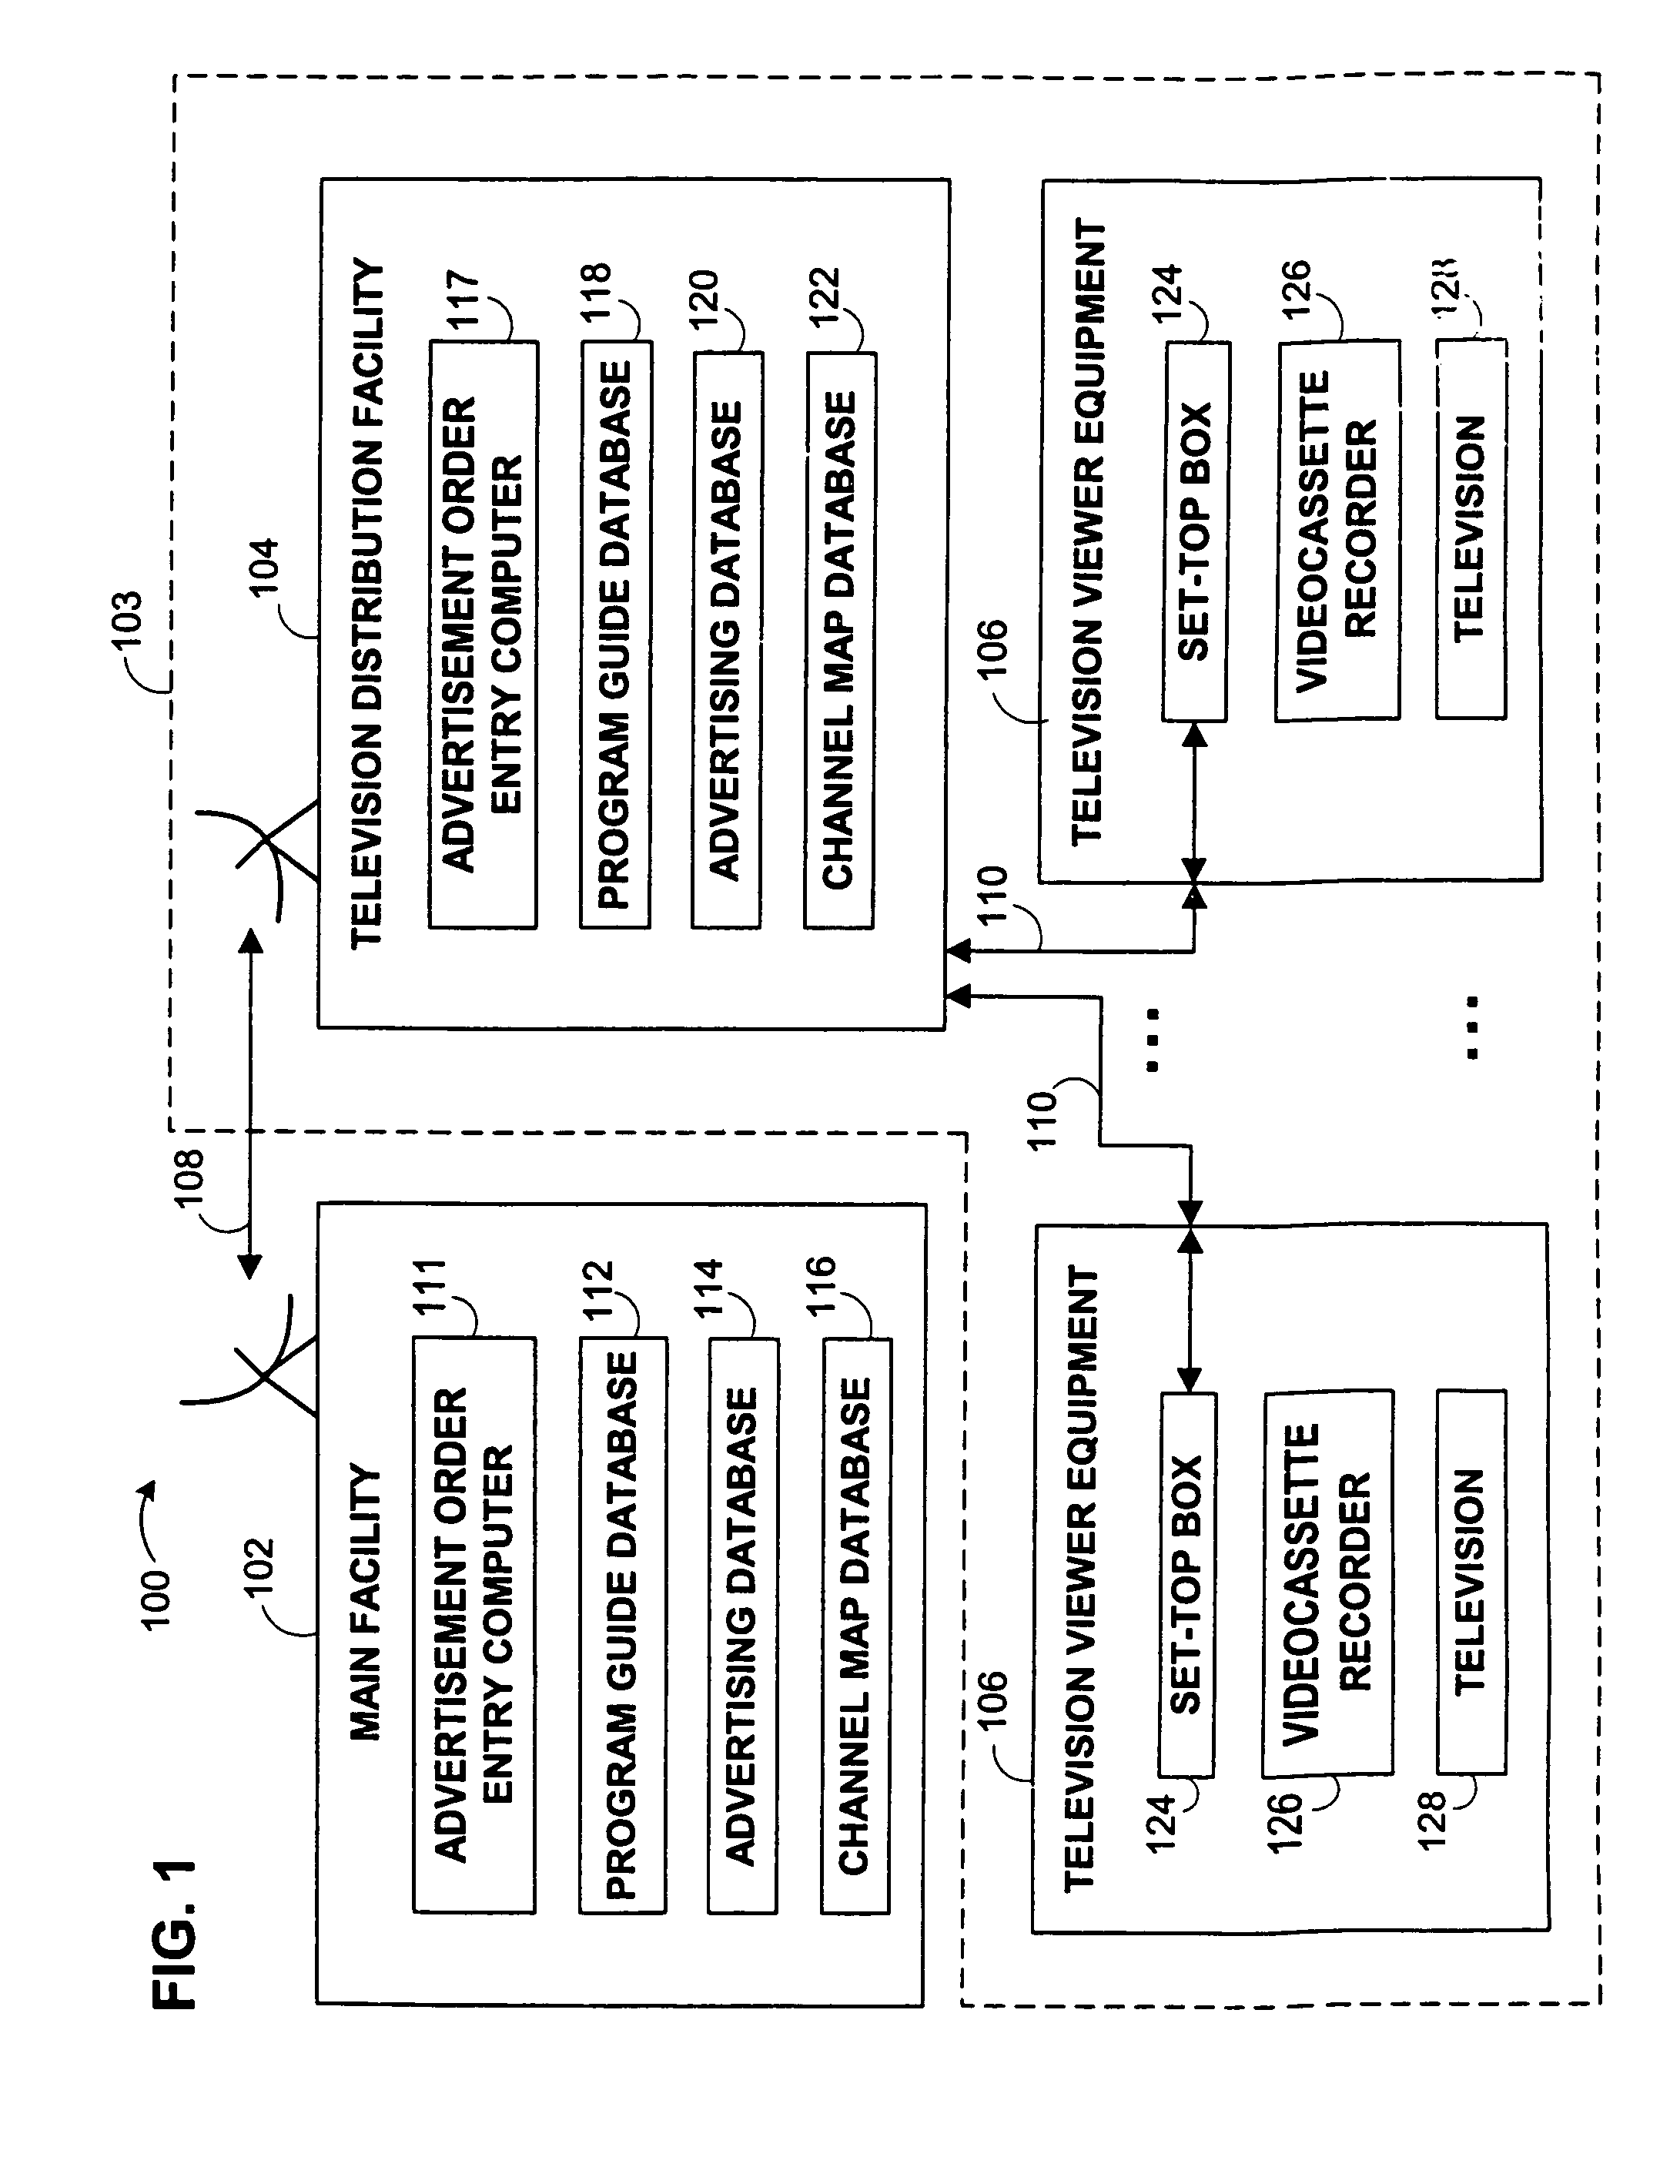 Systems and methods for advertising television networks, channels, and programs